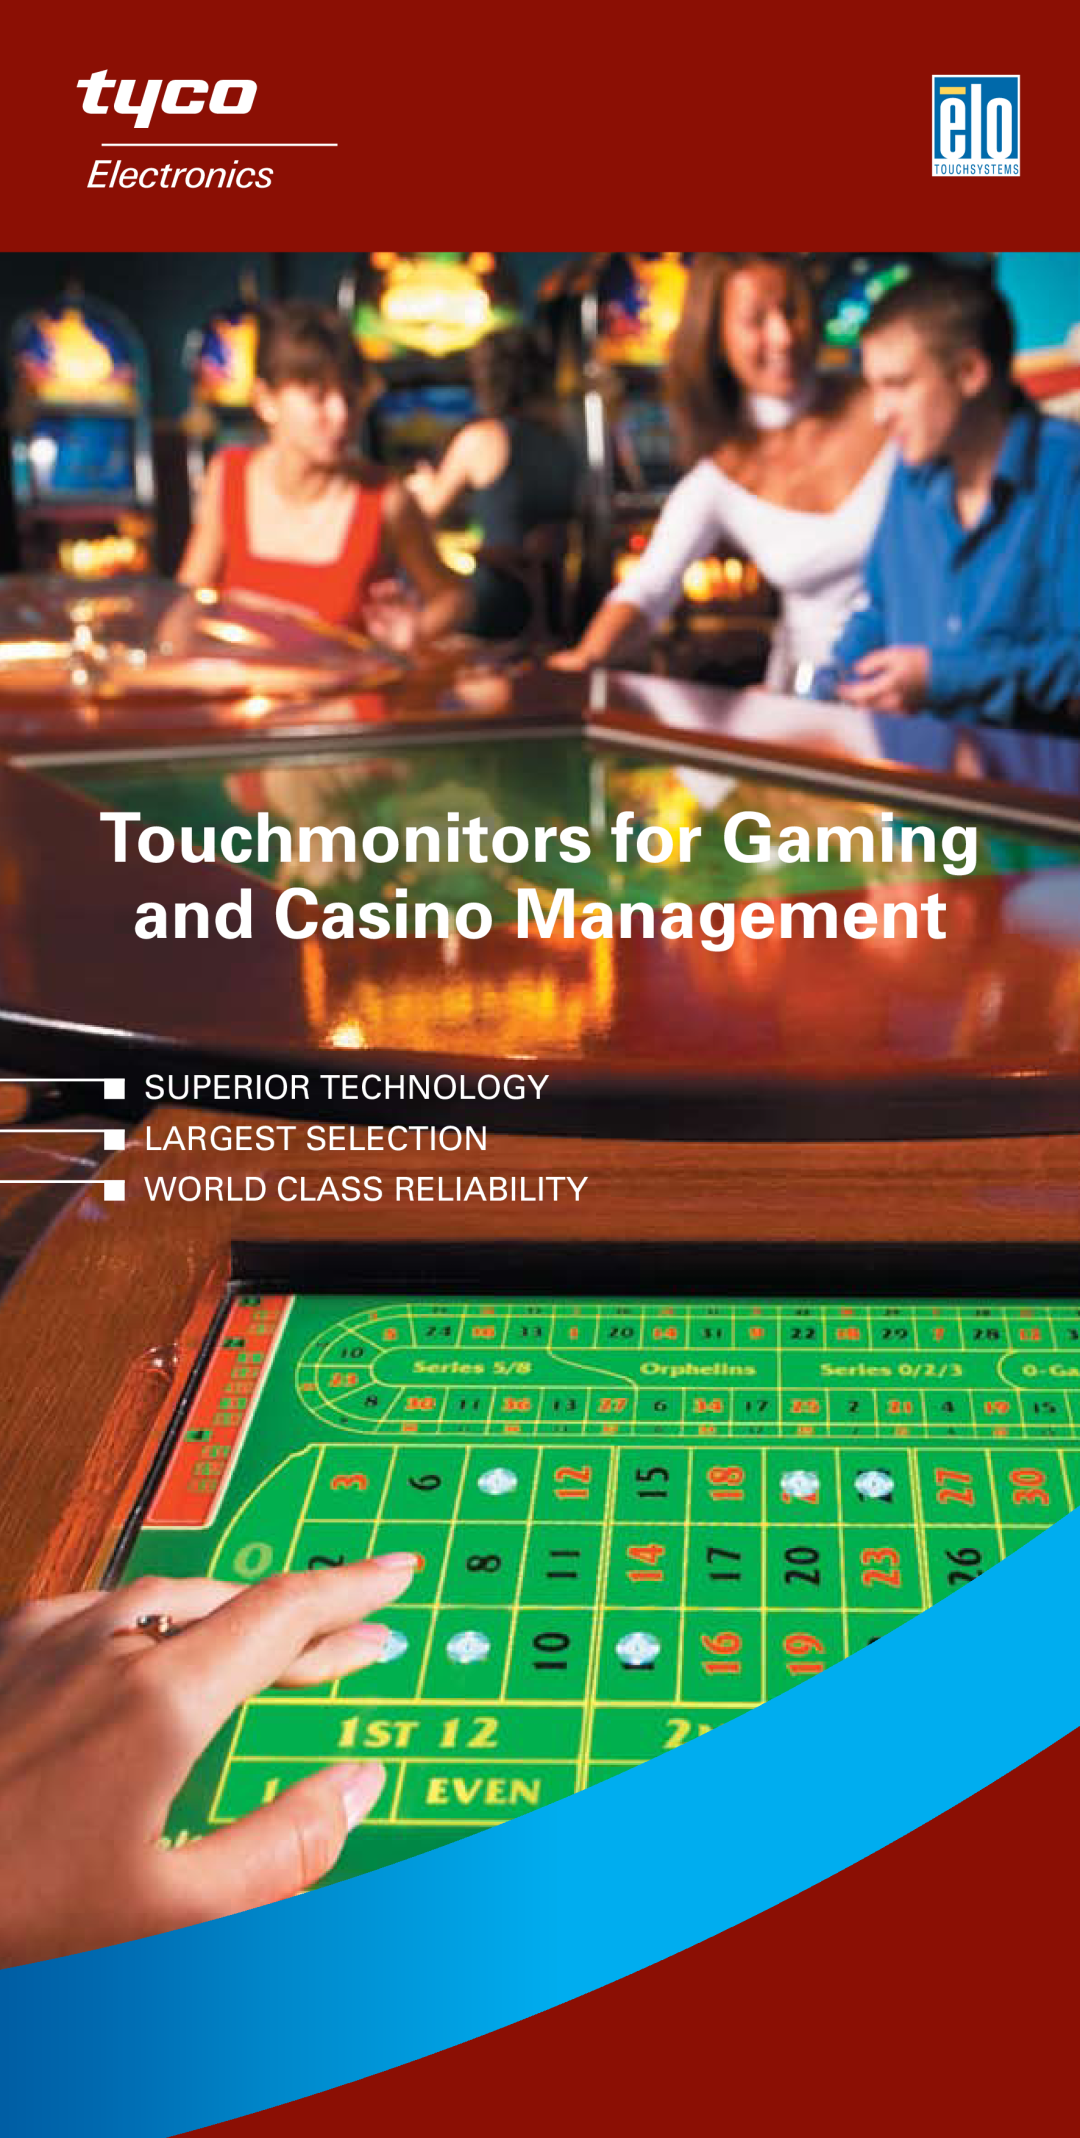 Elo TouchSystems Tyco manual Touchmonitors for Gaming and Casino Management 